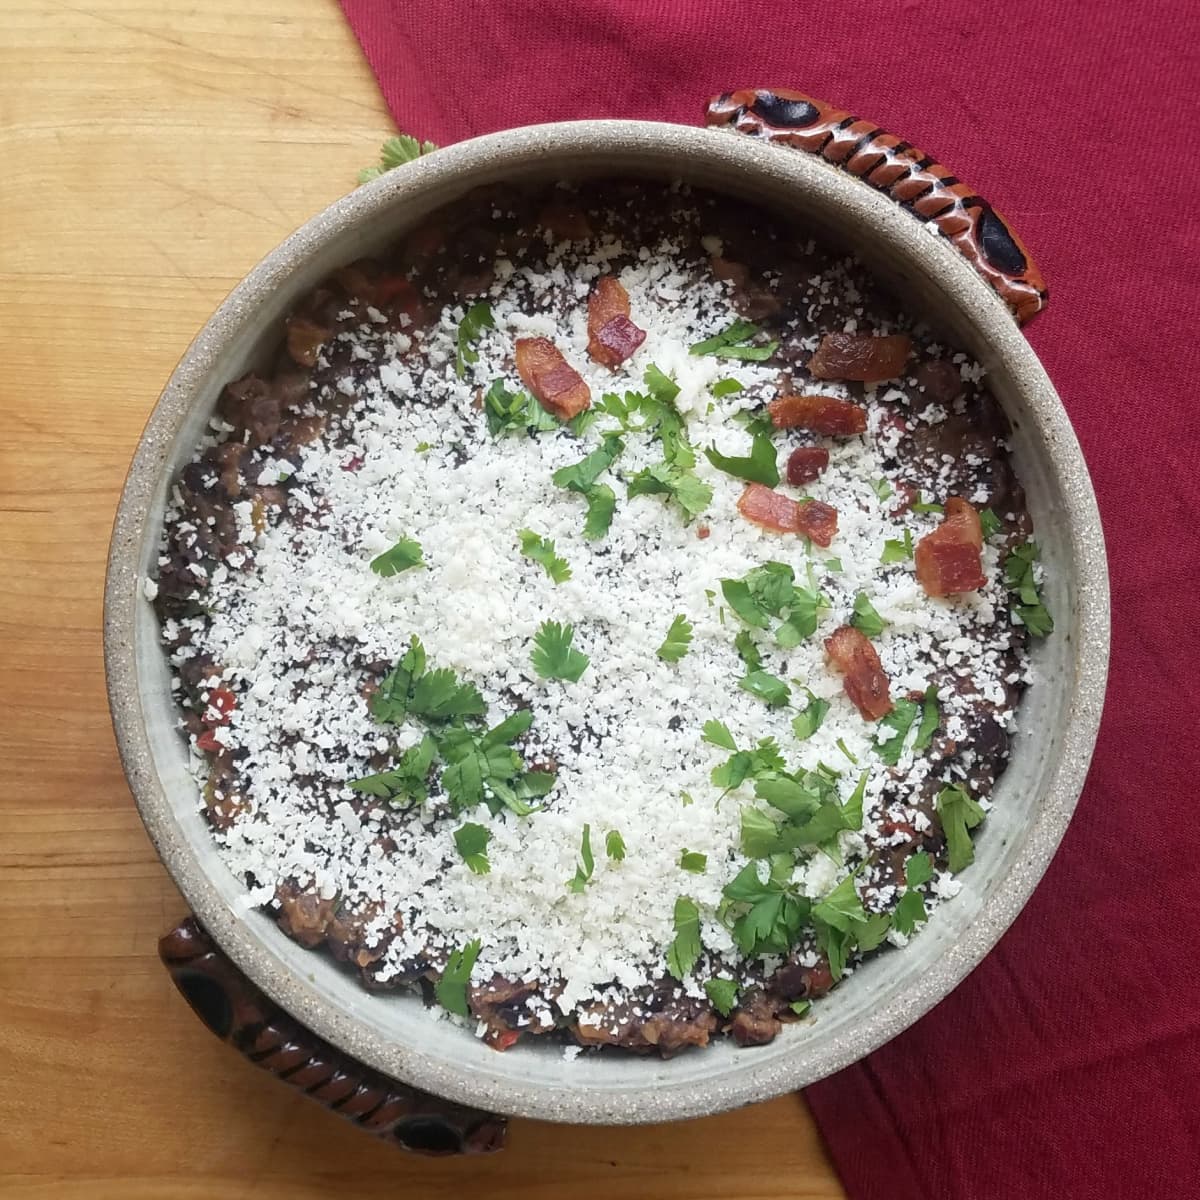 Round crockery casserole dish filled with cotija covered black beans